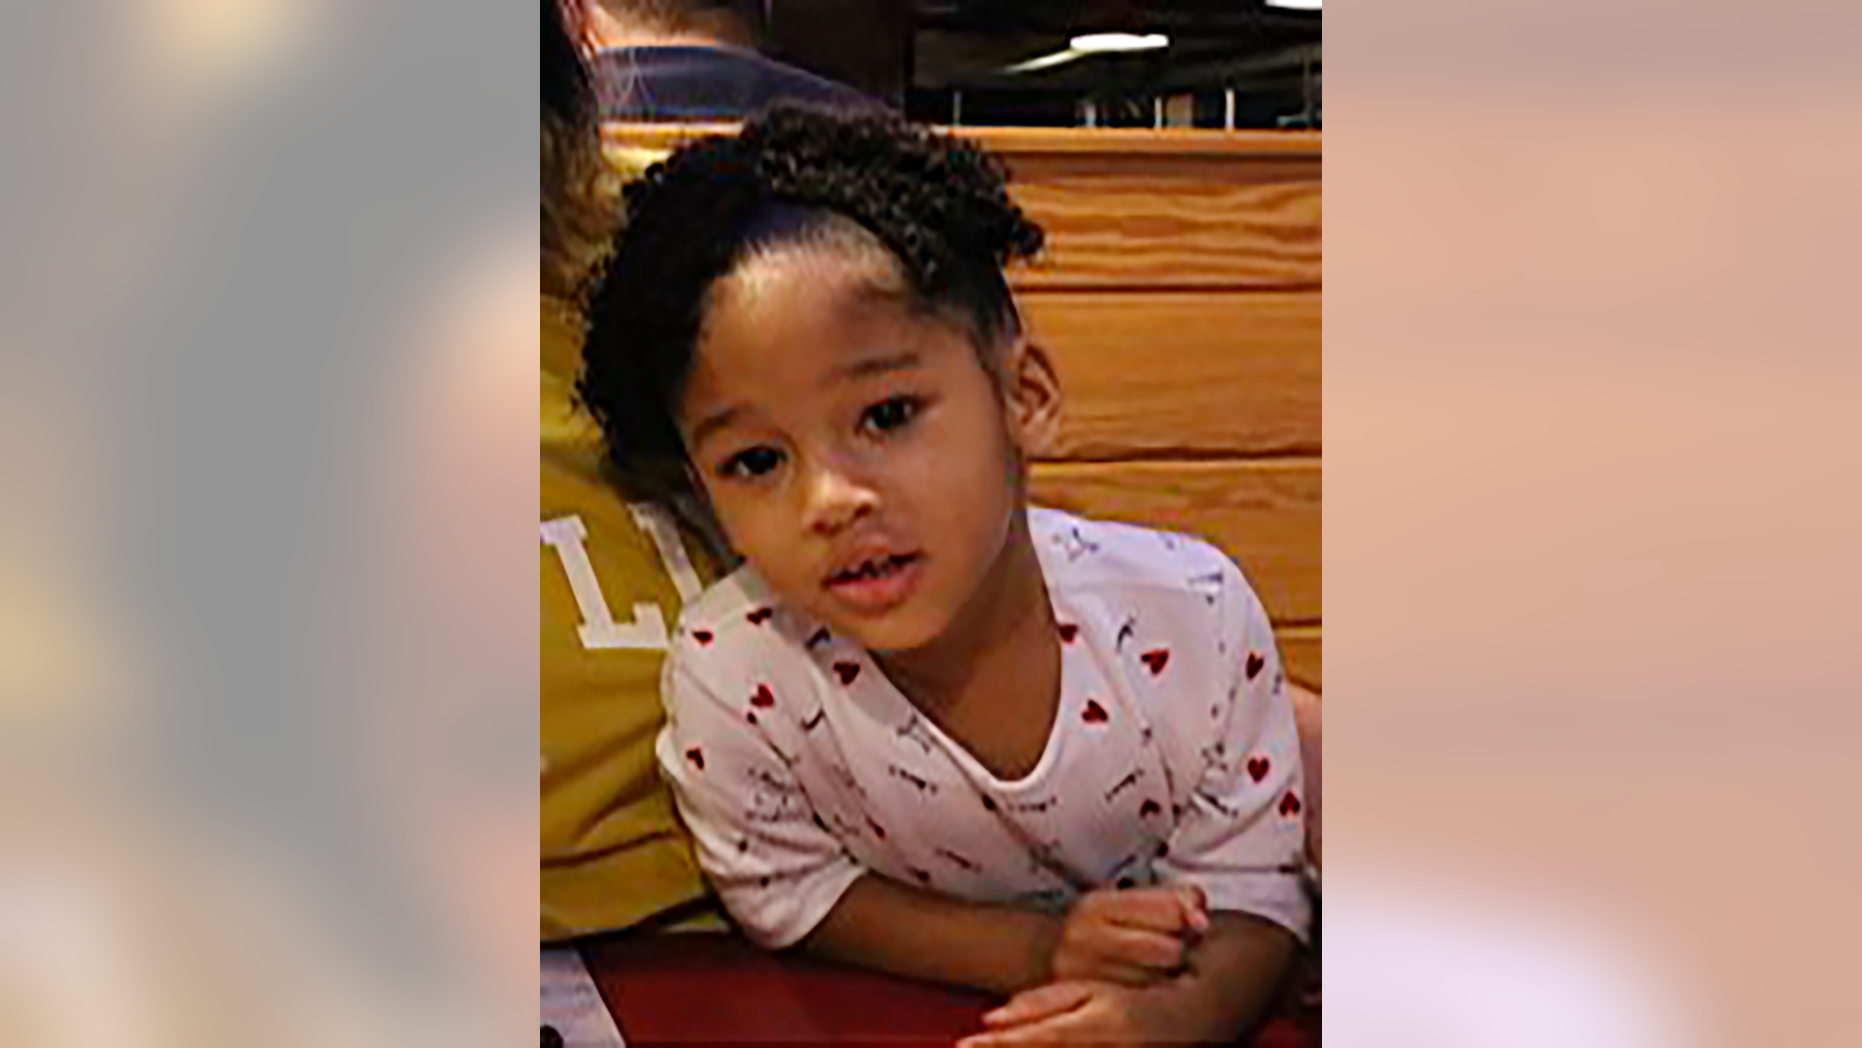 Maleah Davis is an undated photo published by the Houston Police Department. Houston police are trying to determine what happened to the 4-year-old girl after her father-in-law said she was taken away by men who had released her, along with her 2-year-old son, after having also removed. An Amber alert was issued Sunday morning, May 7, 2019, in favor of Maleah Davis. (Houston Police Department via AP)